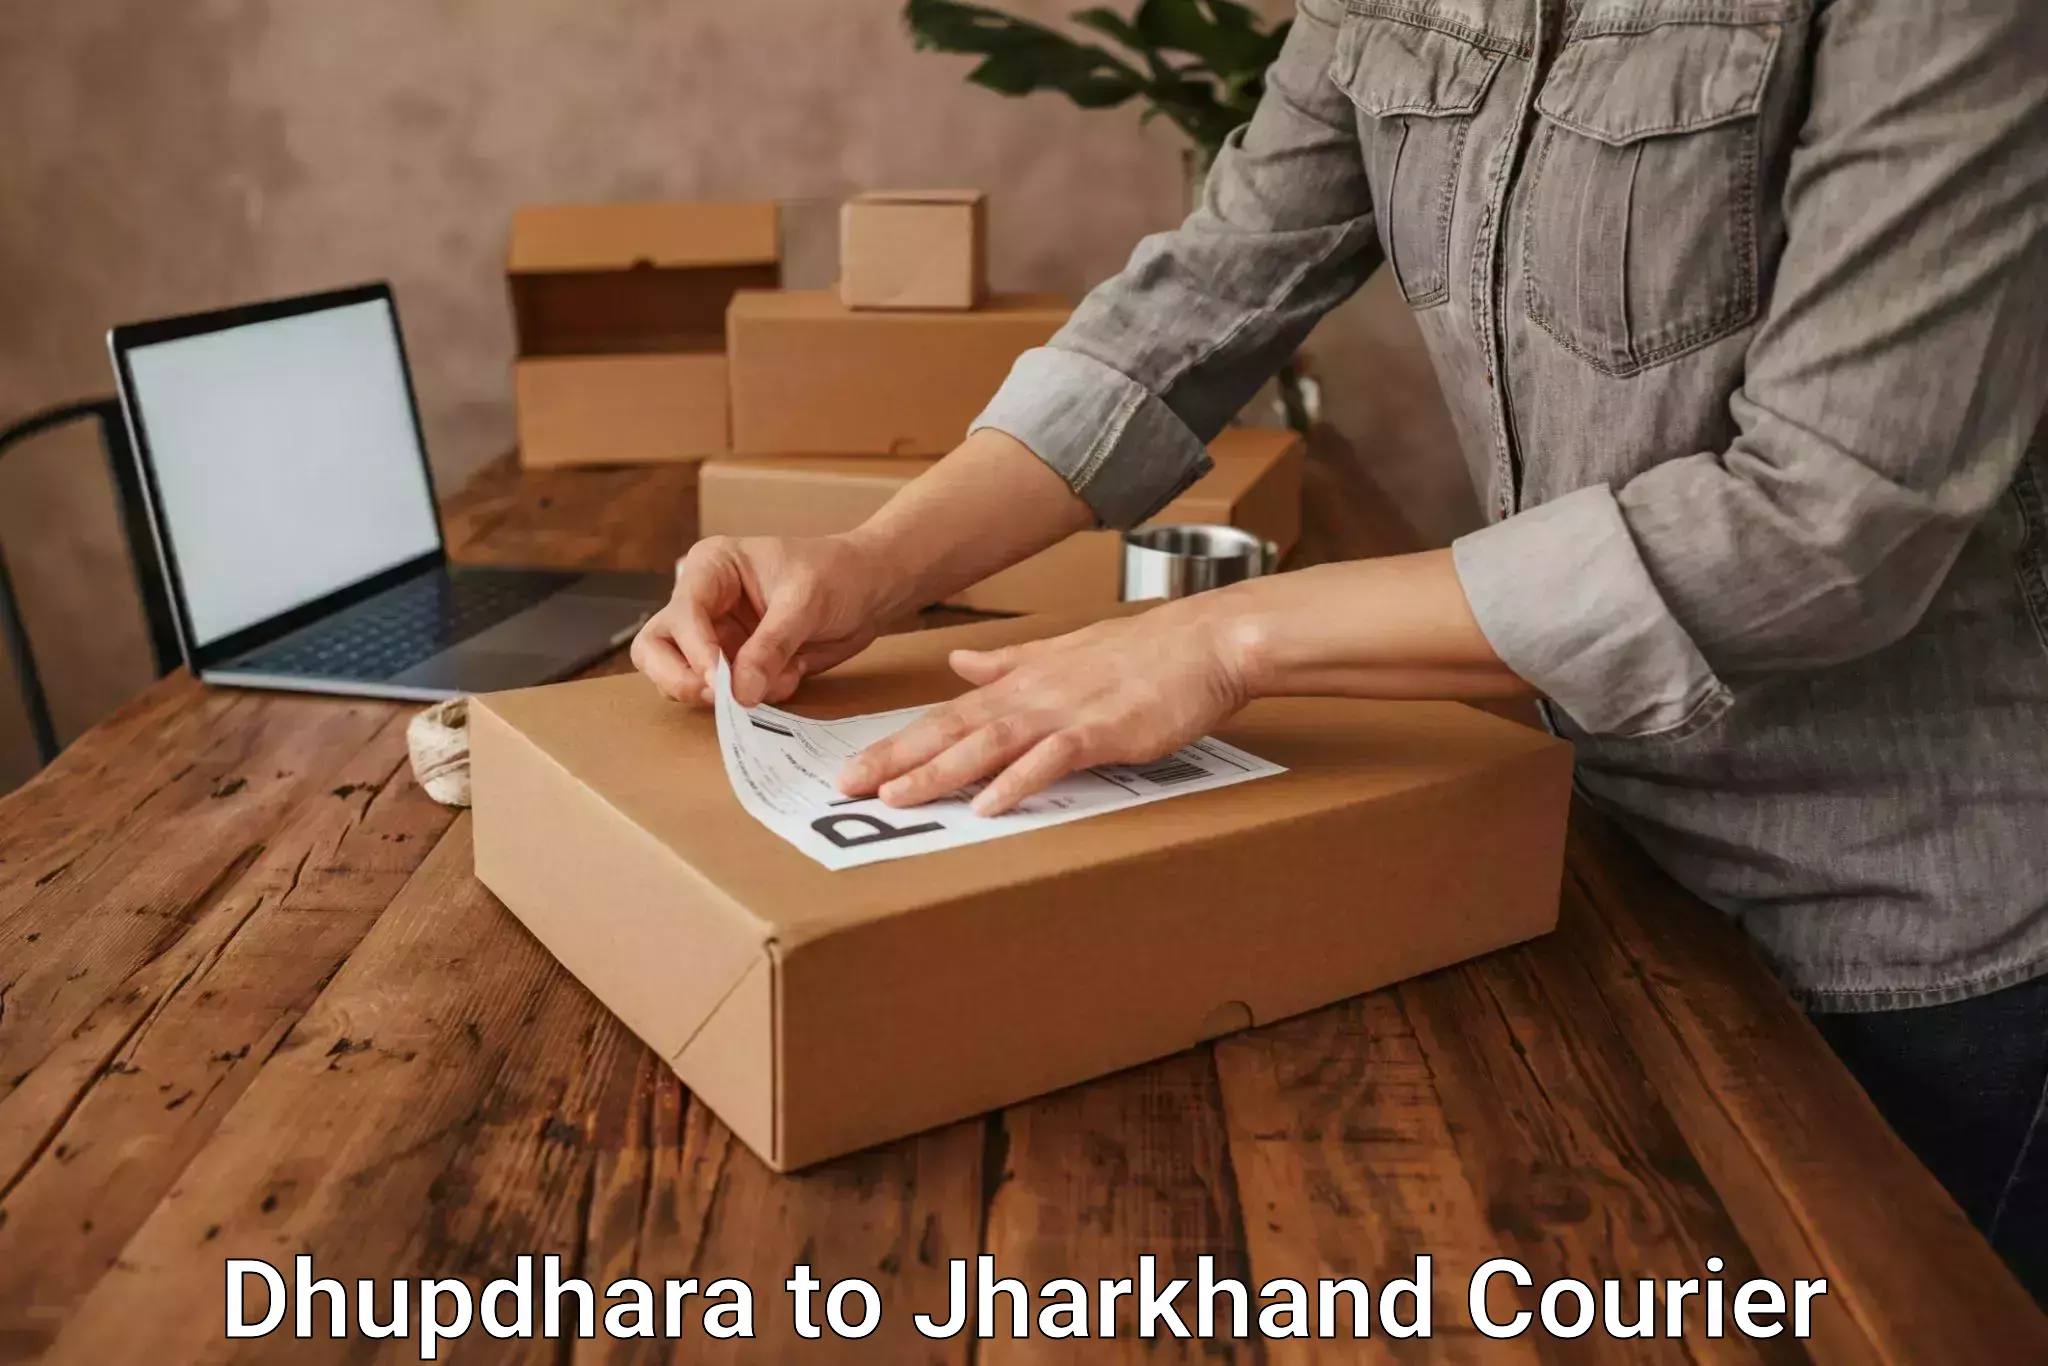 Comprehensive shipping network Dhupdhara to Jharkhand